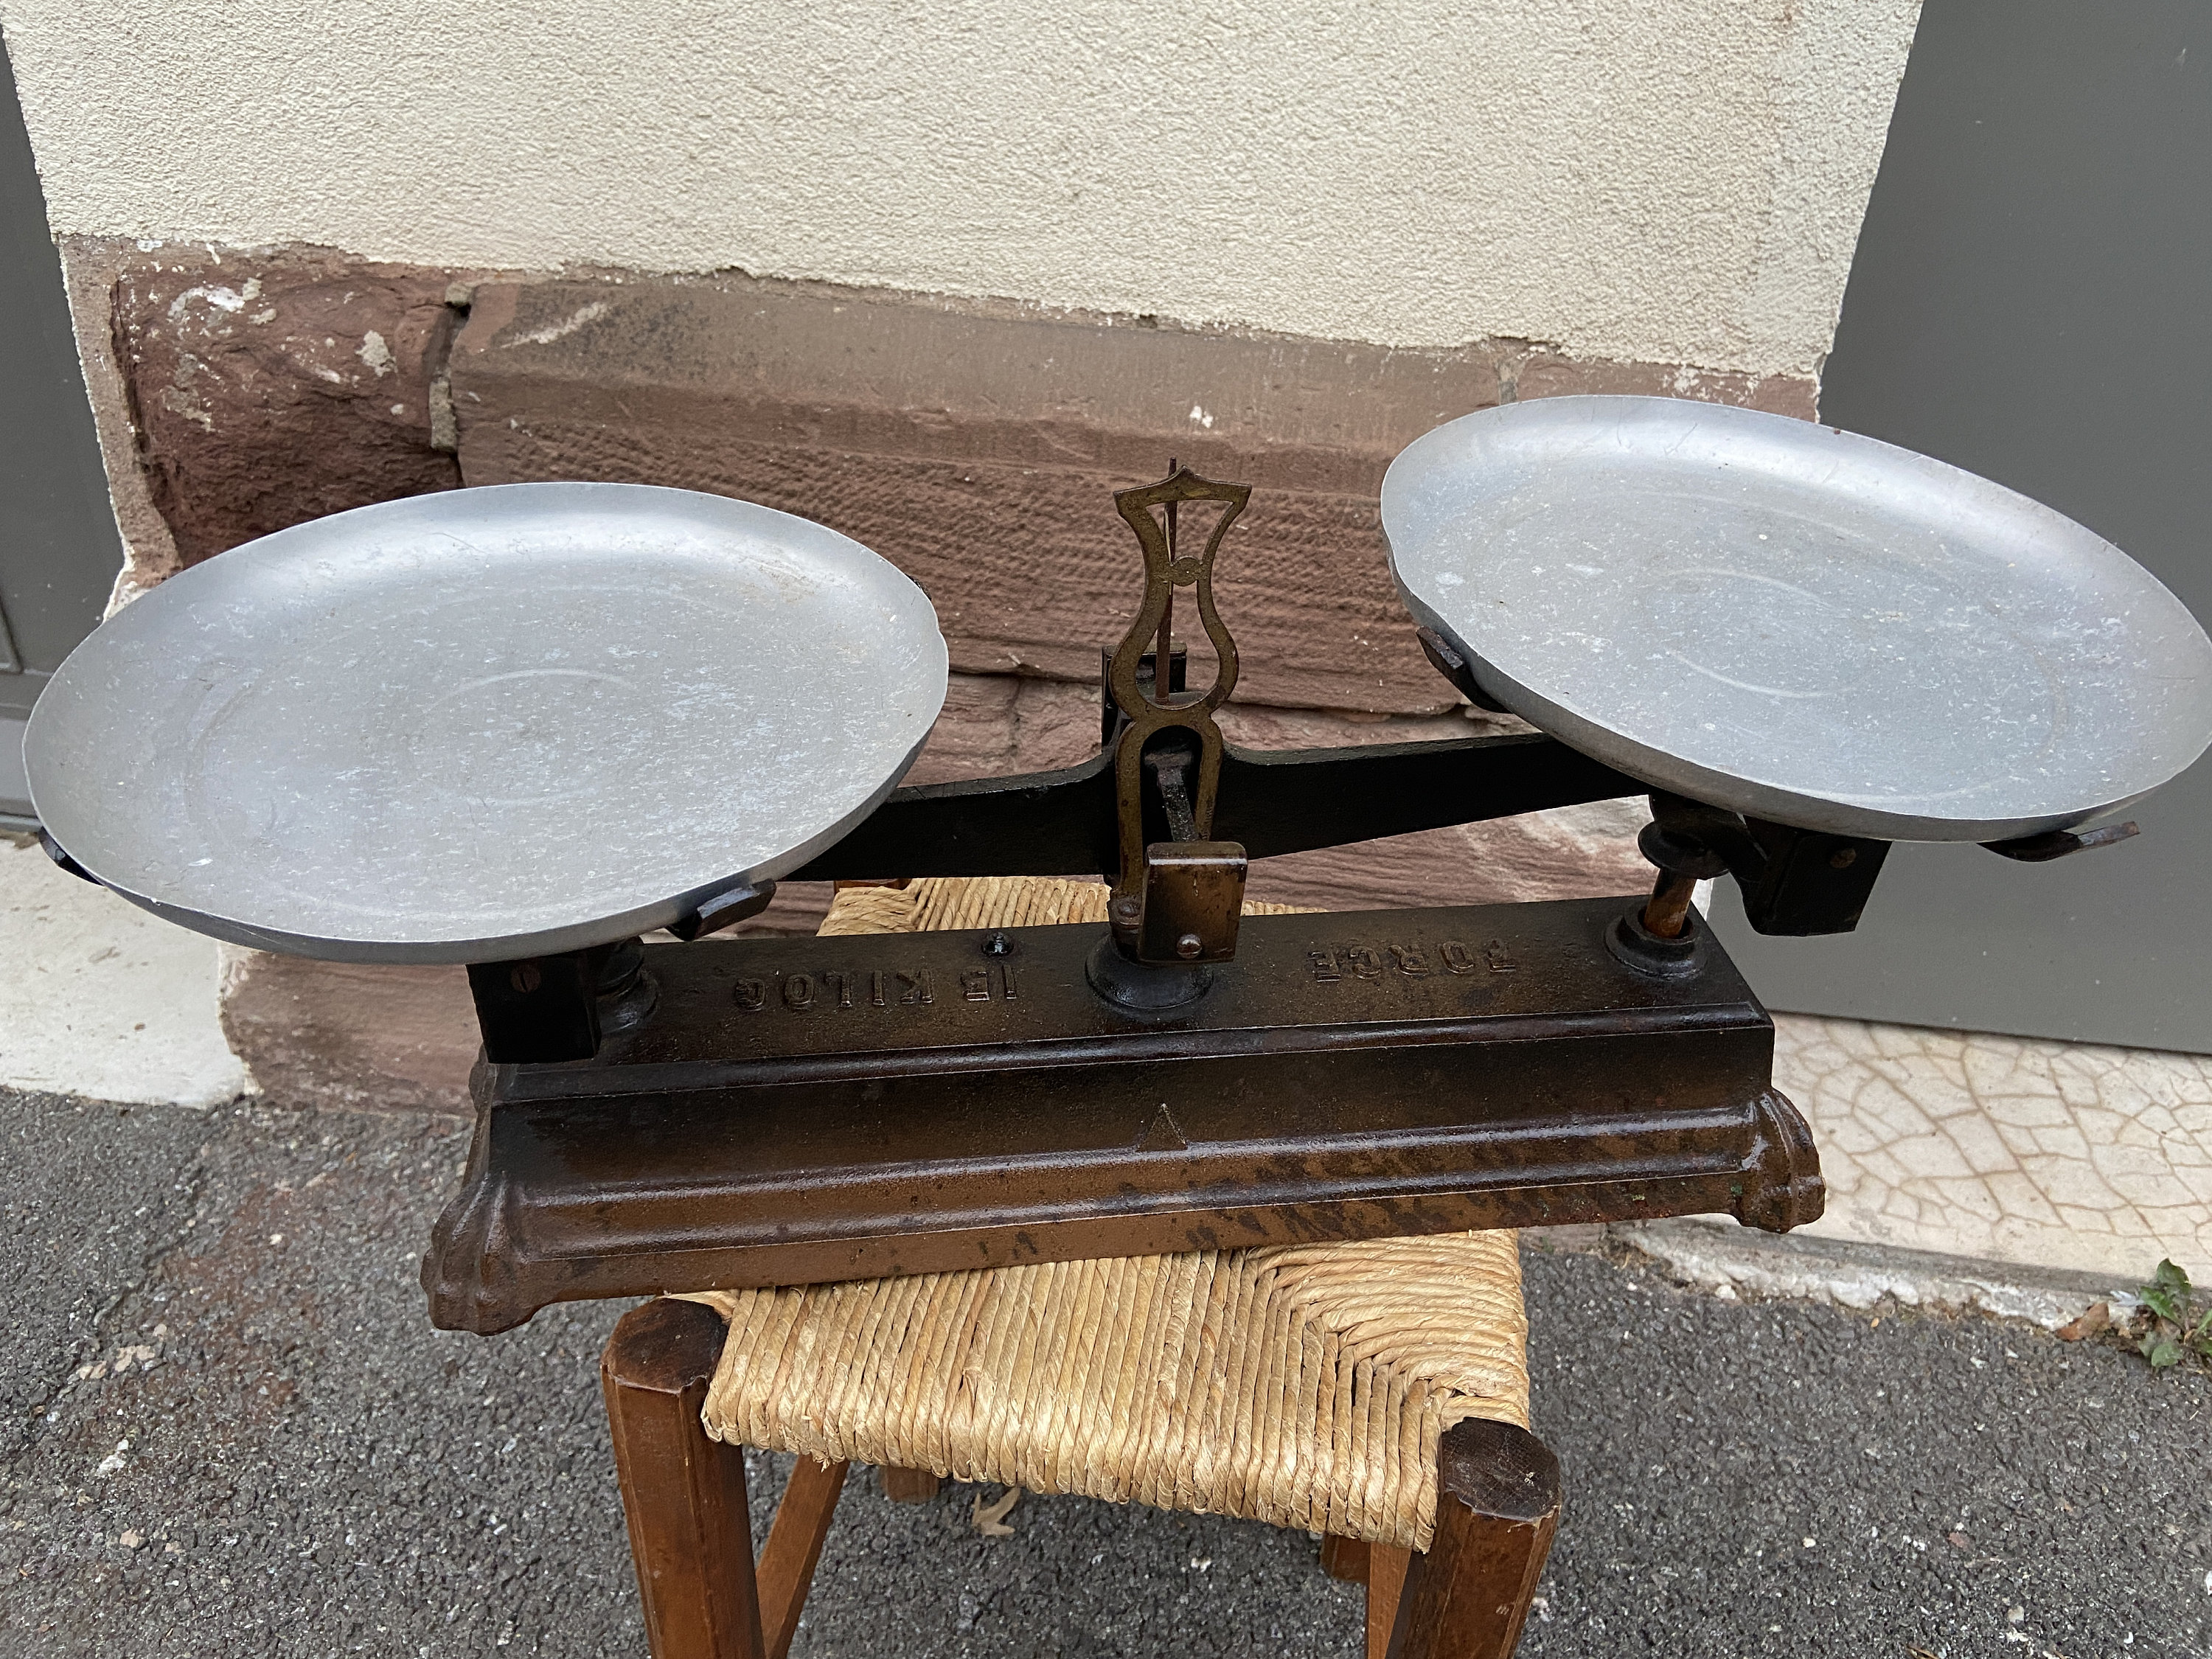 French Balance Store Grocery Scale Roberval Iron Scale, Metal Kichen Antique Scales, Brass Alsace